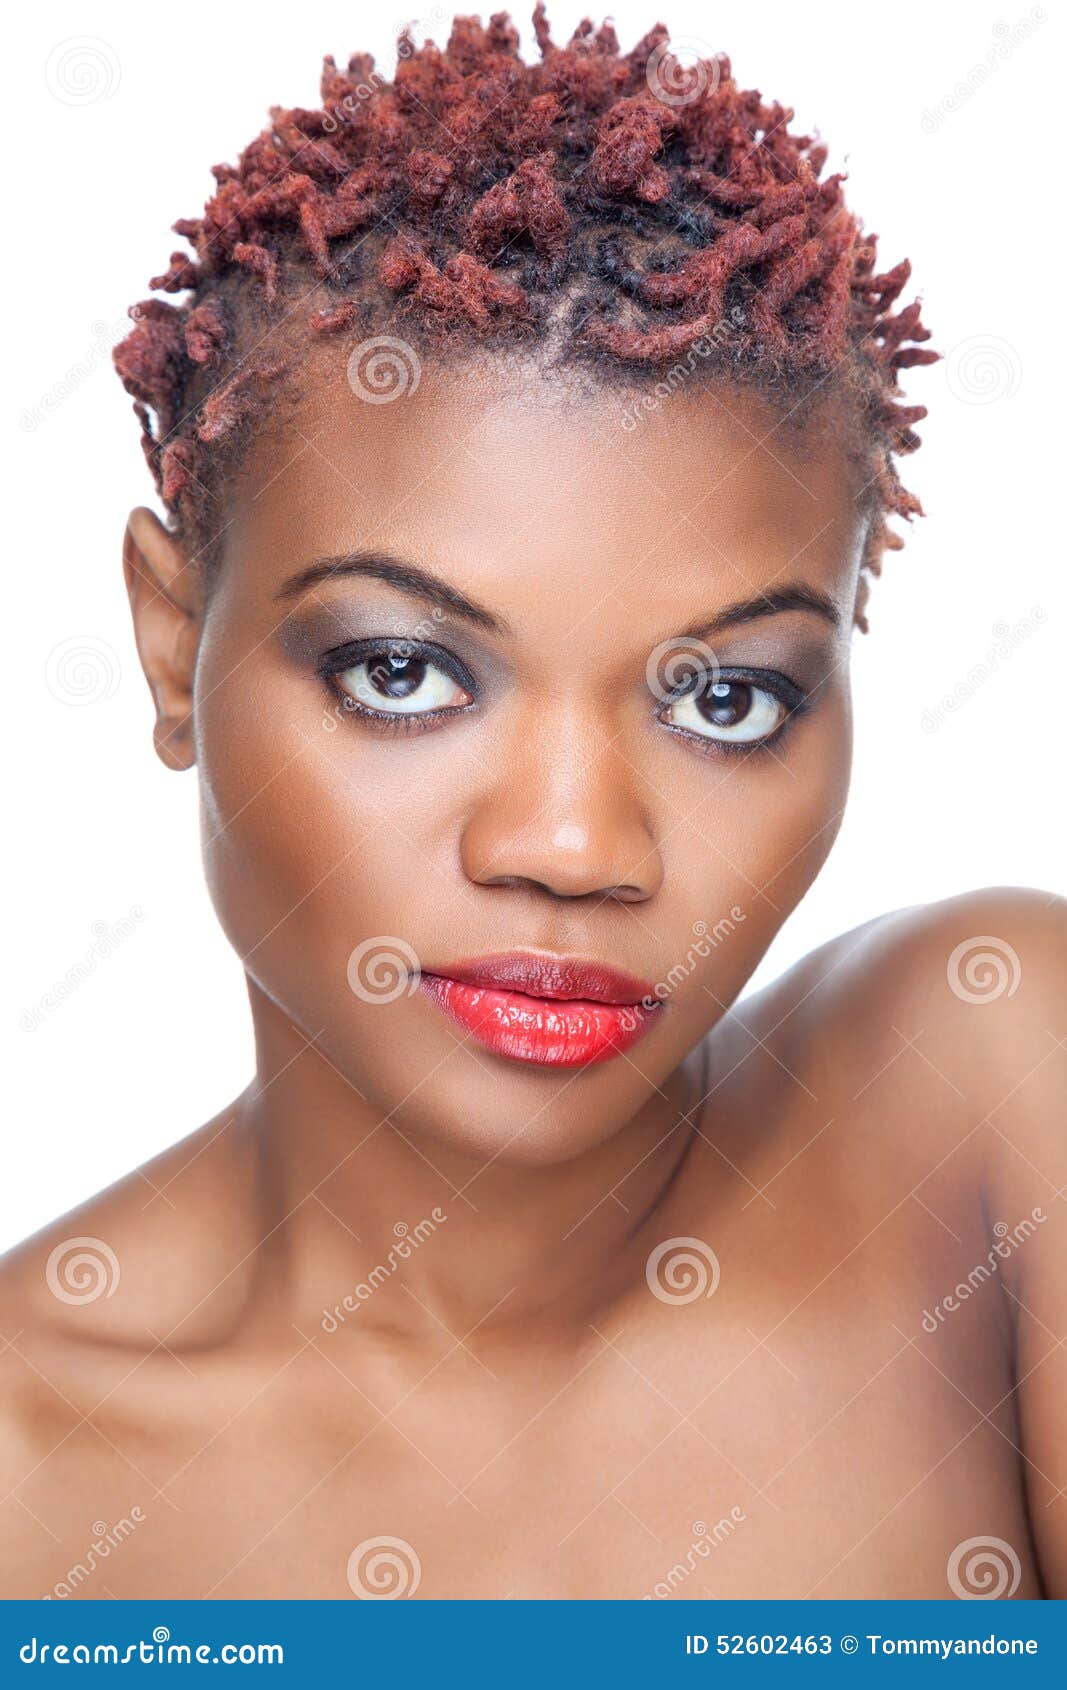 Black Beauty with Short Spiky Hair Stock Image - Image of cosmetic, clean:  52602463